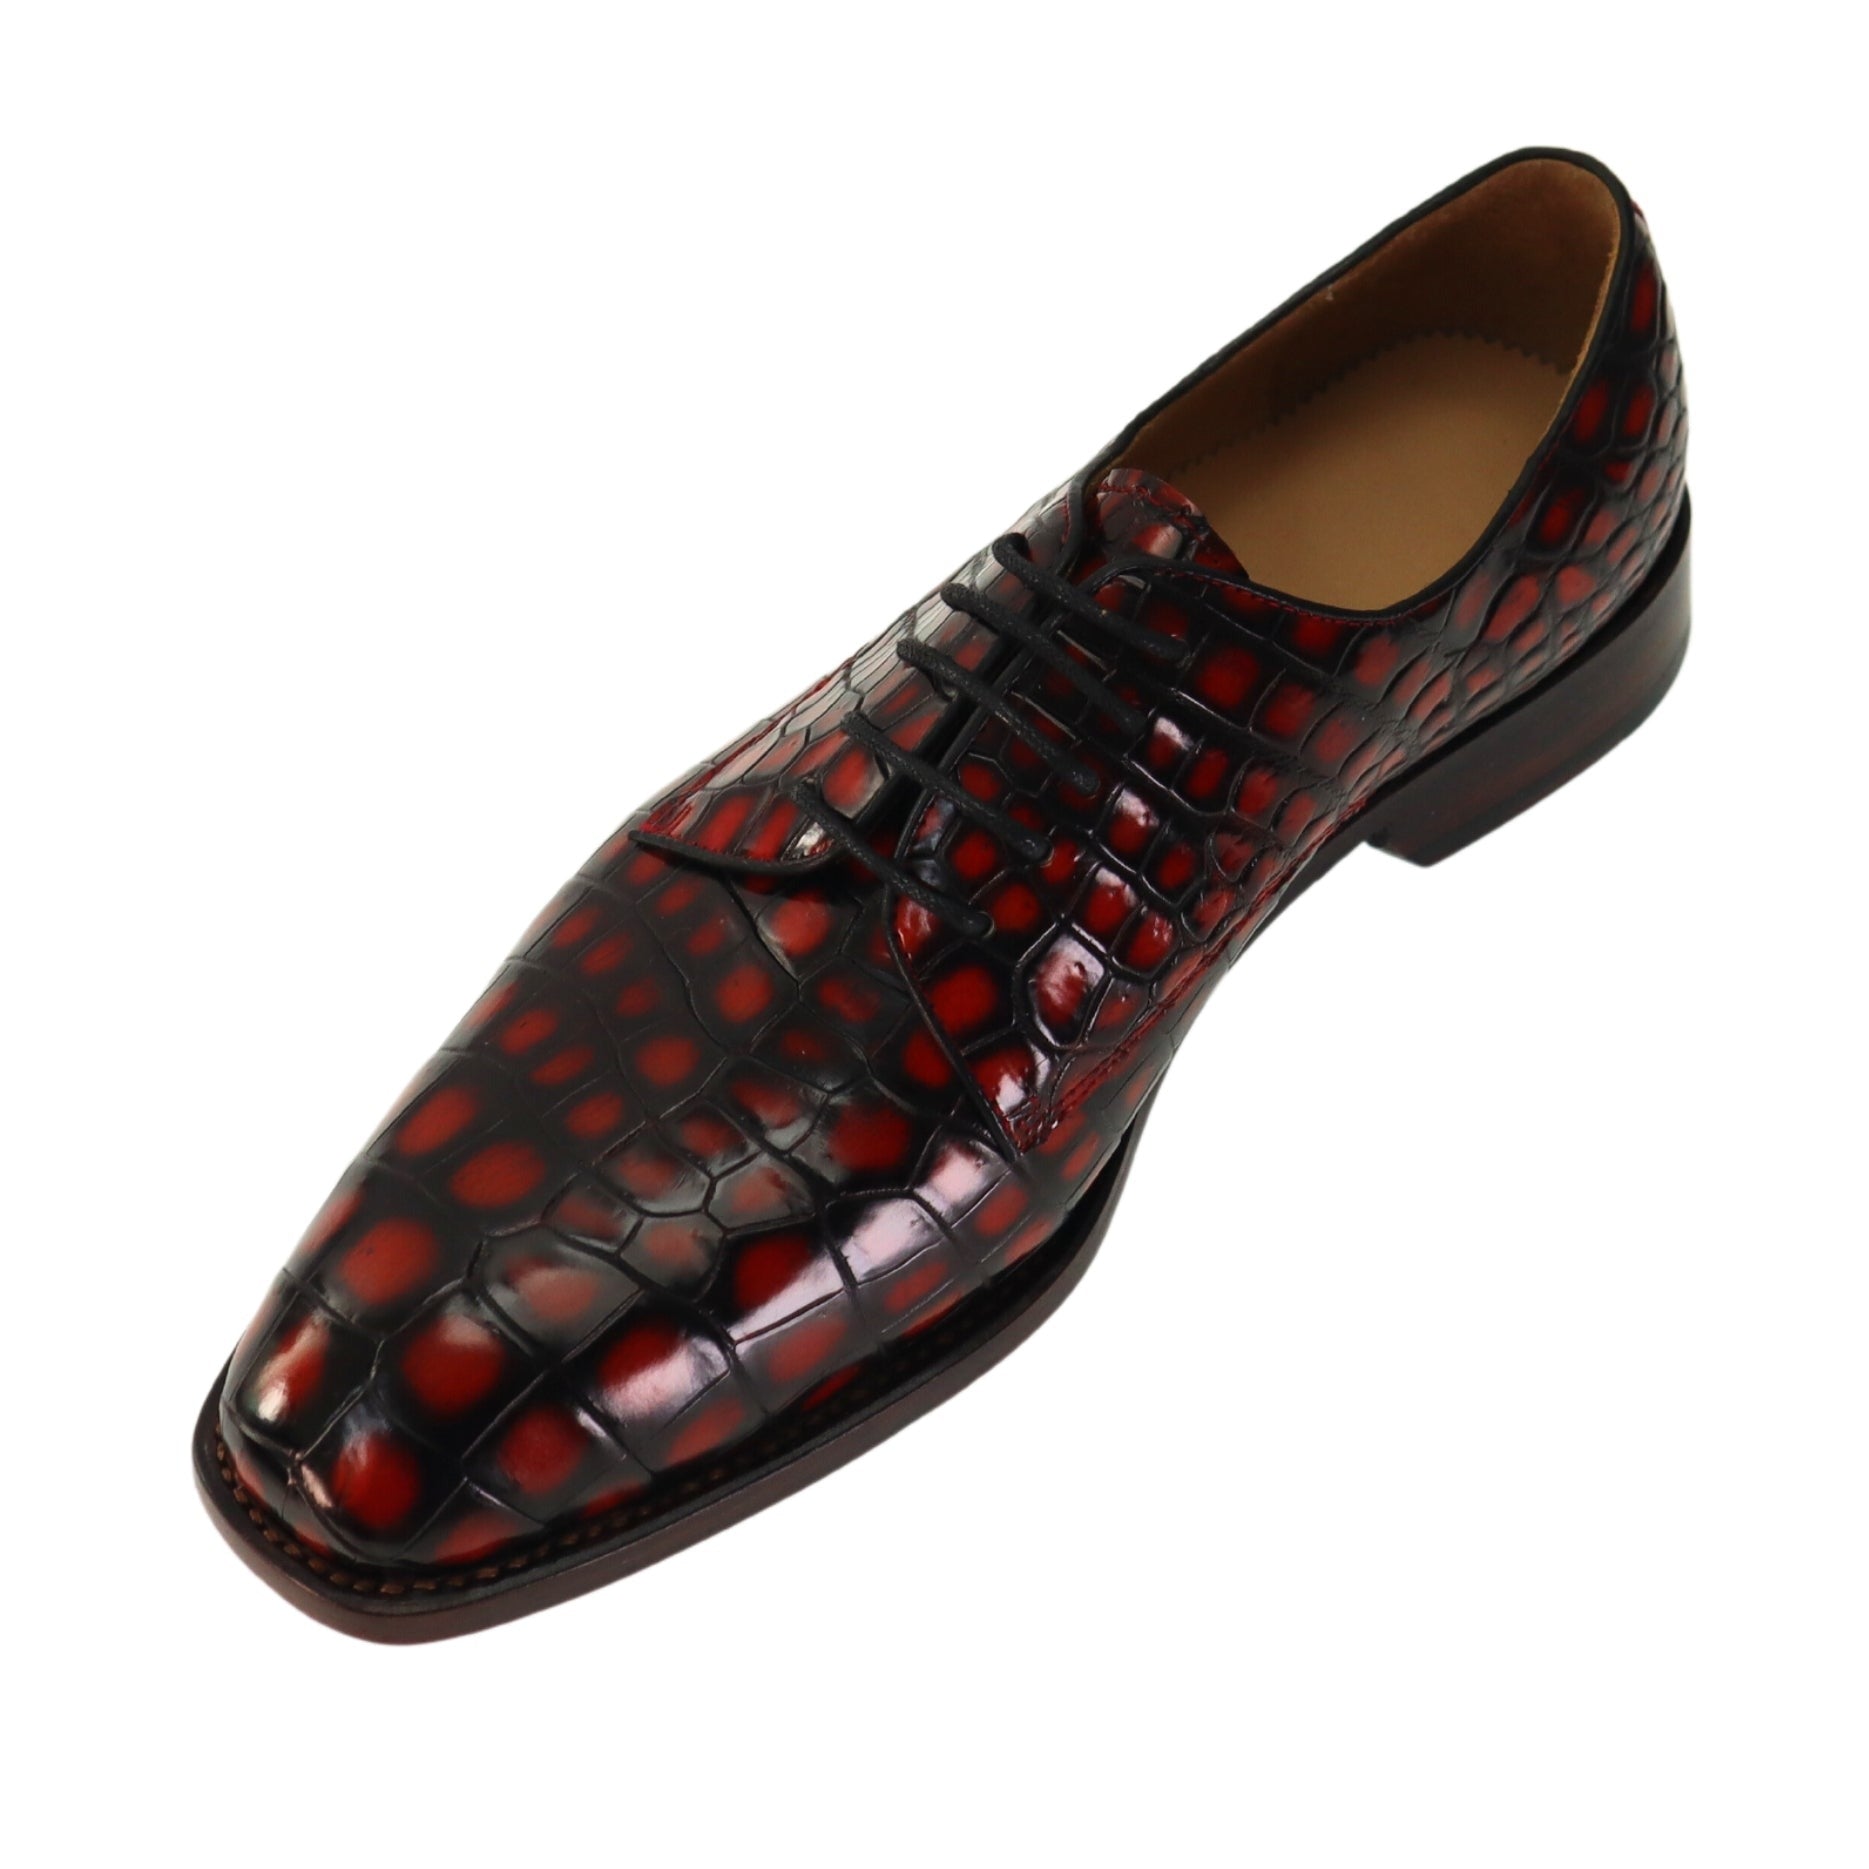 Genuine Alligator Leather Men’s Derby Perforated Lace-Up Dress Shoes Red Patina Alligator